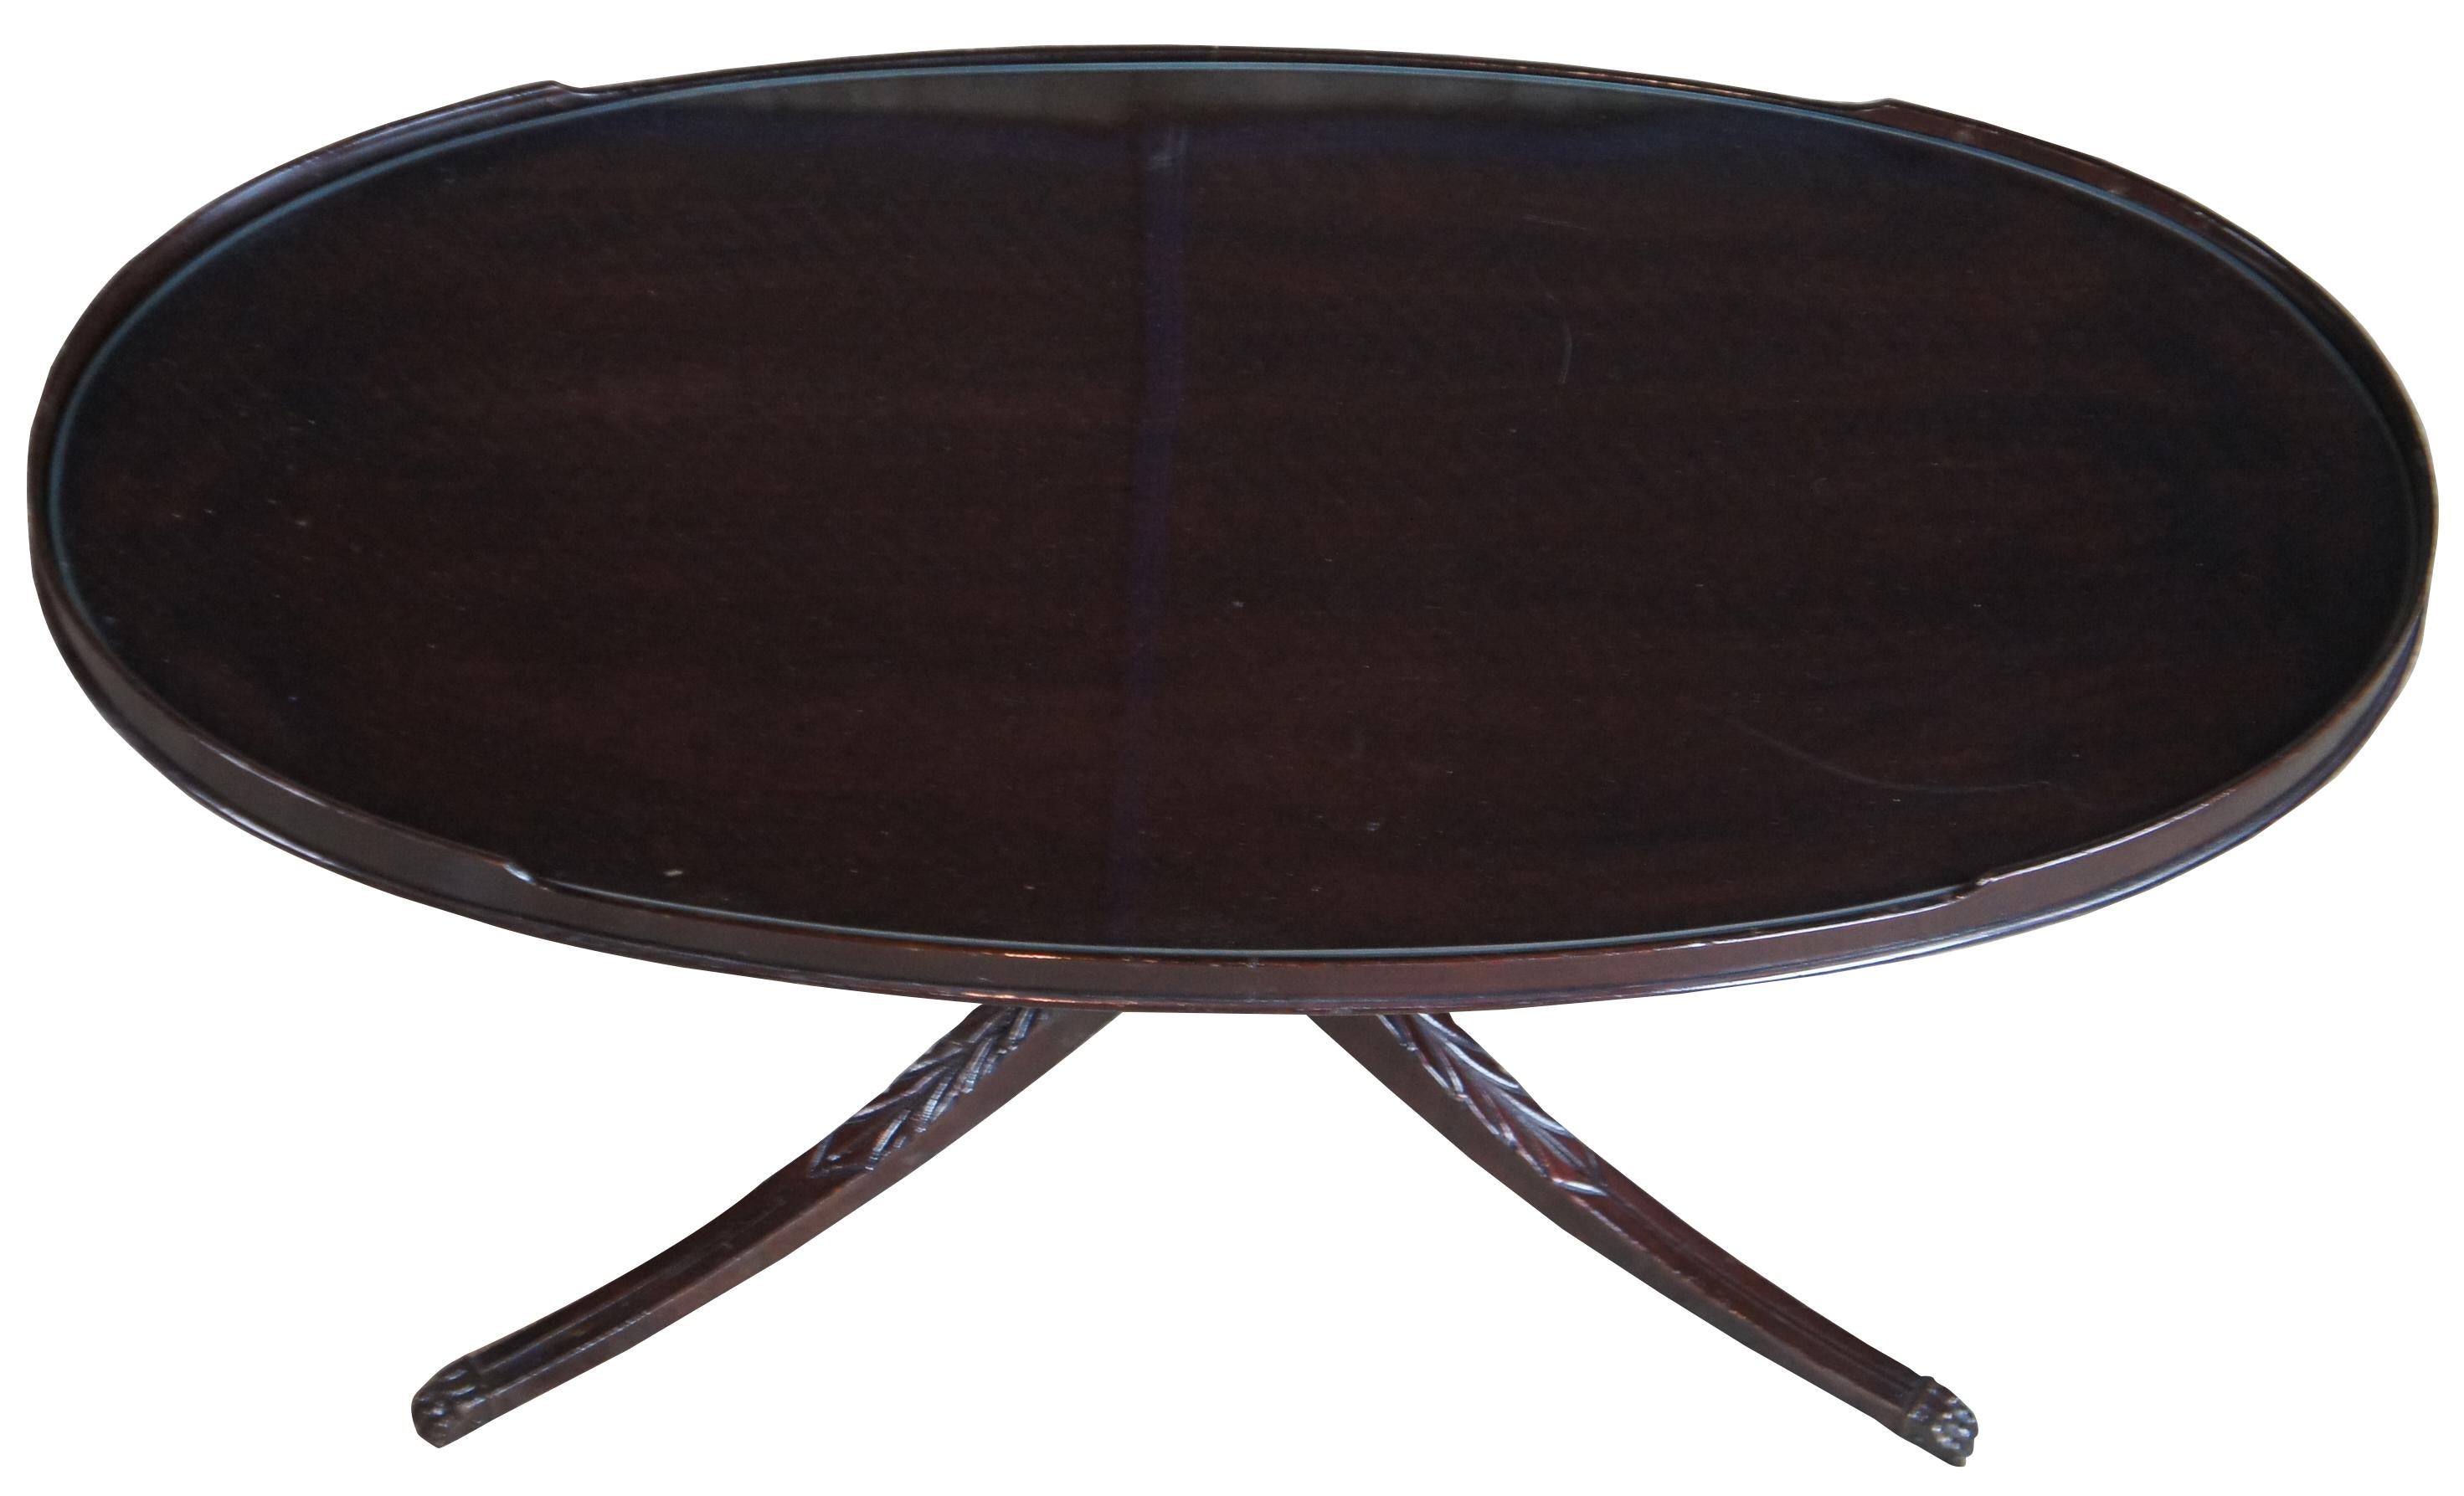 duncan phyfe coffee table with glass top